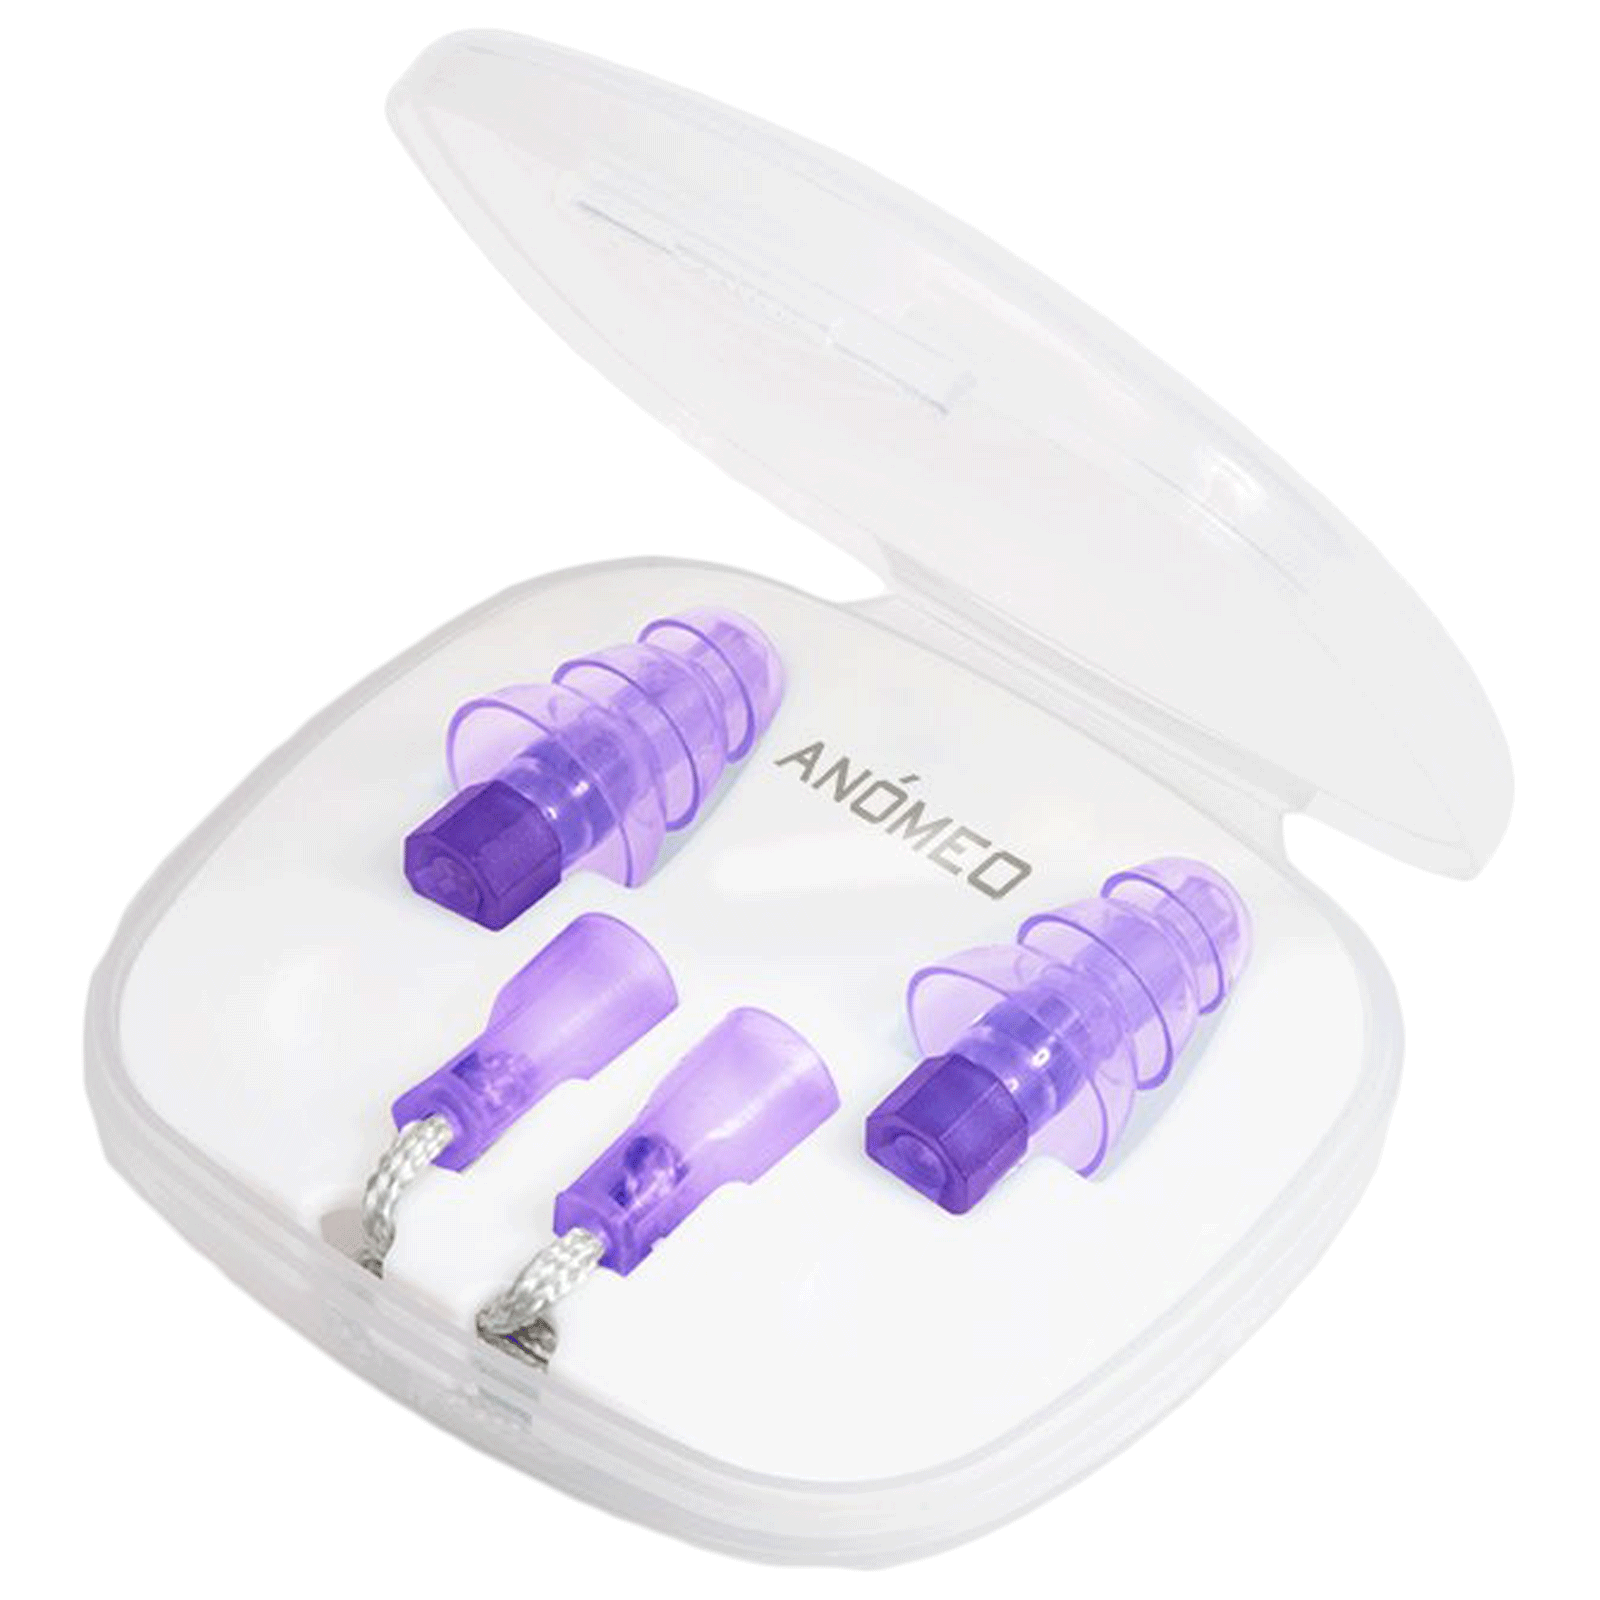 Anomeo Focus and Relax Silicone and Polypropylene Earplugs (Noise Cancellation, 2430, Purple)